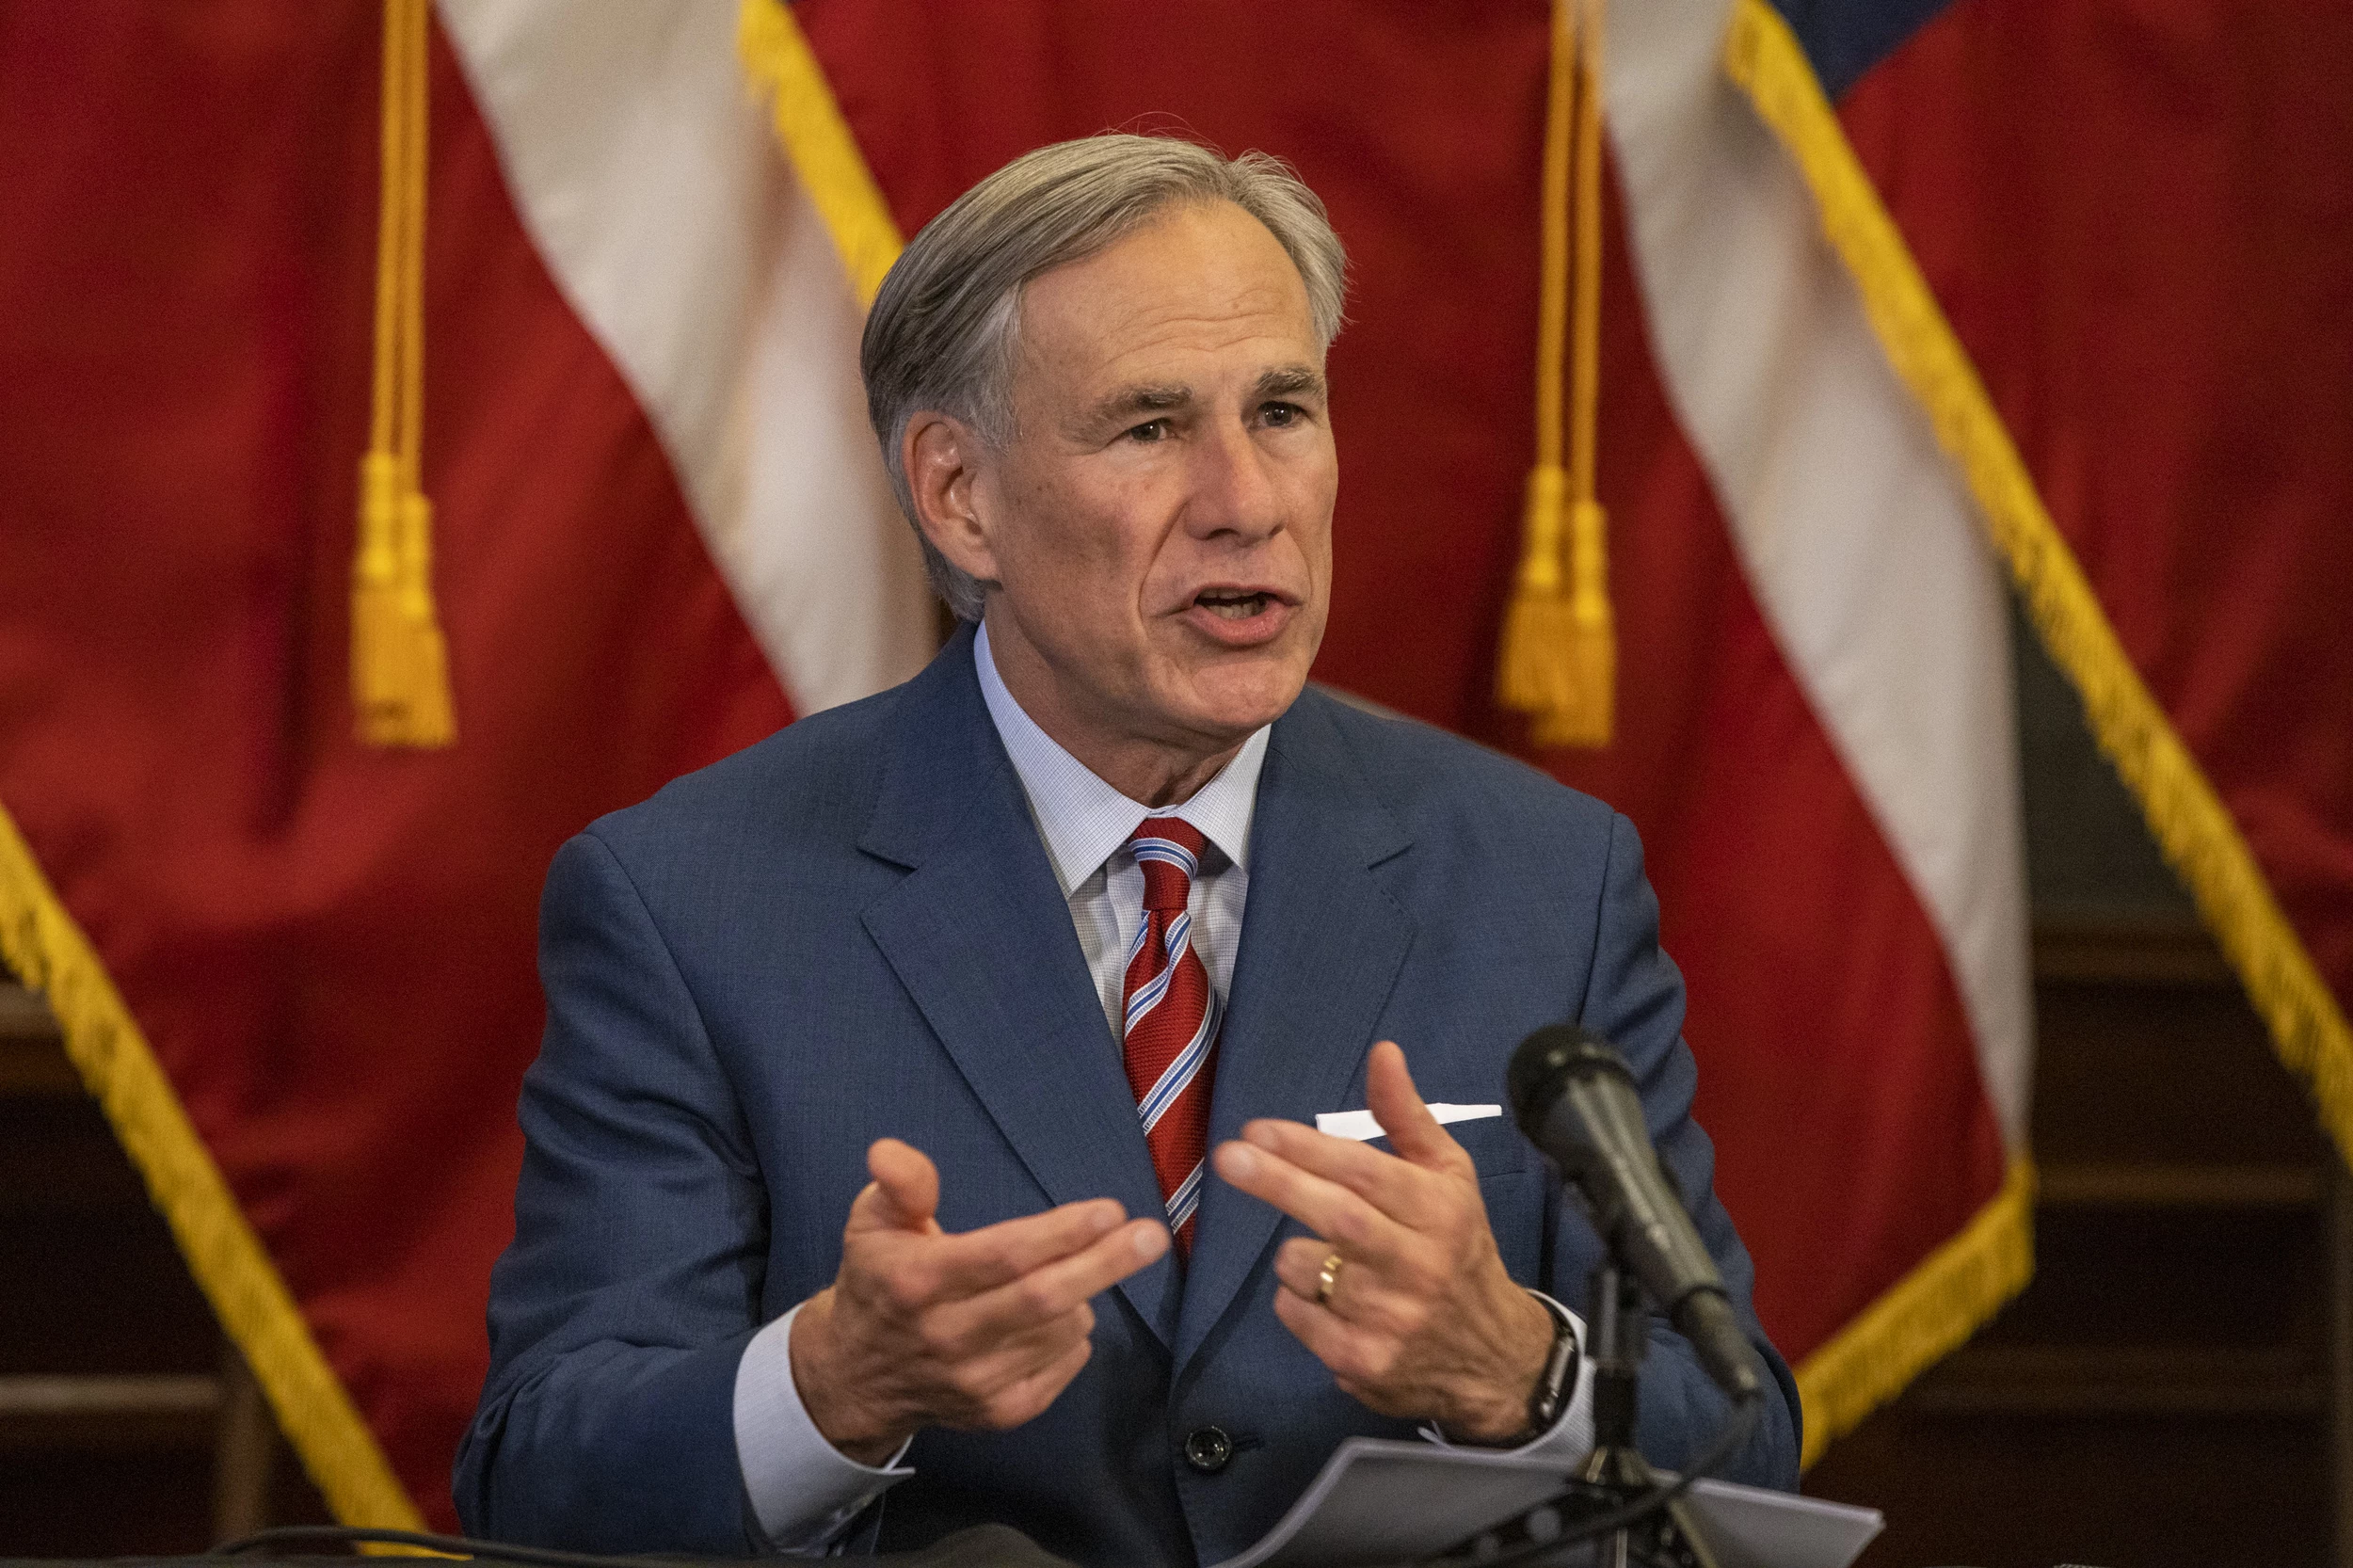 Governor Abbott Says Texans Have Mastered The Safe Practices